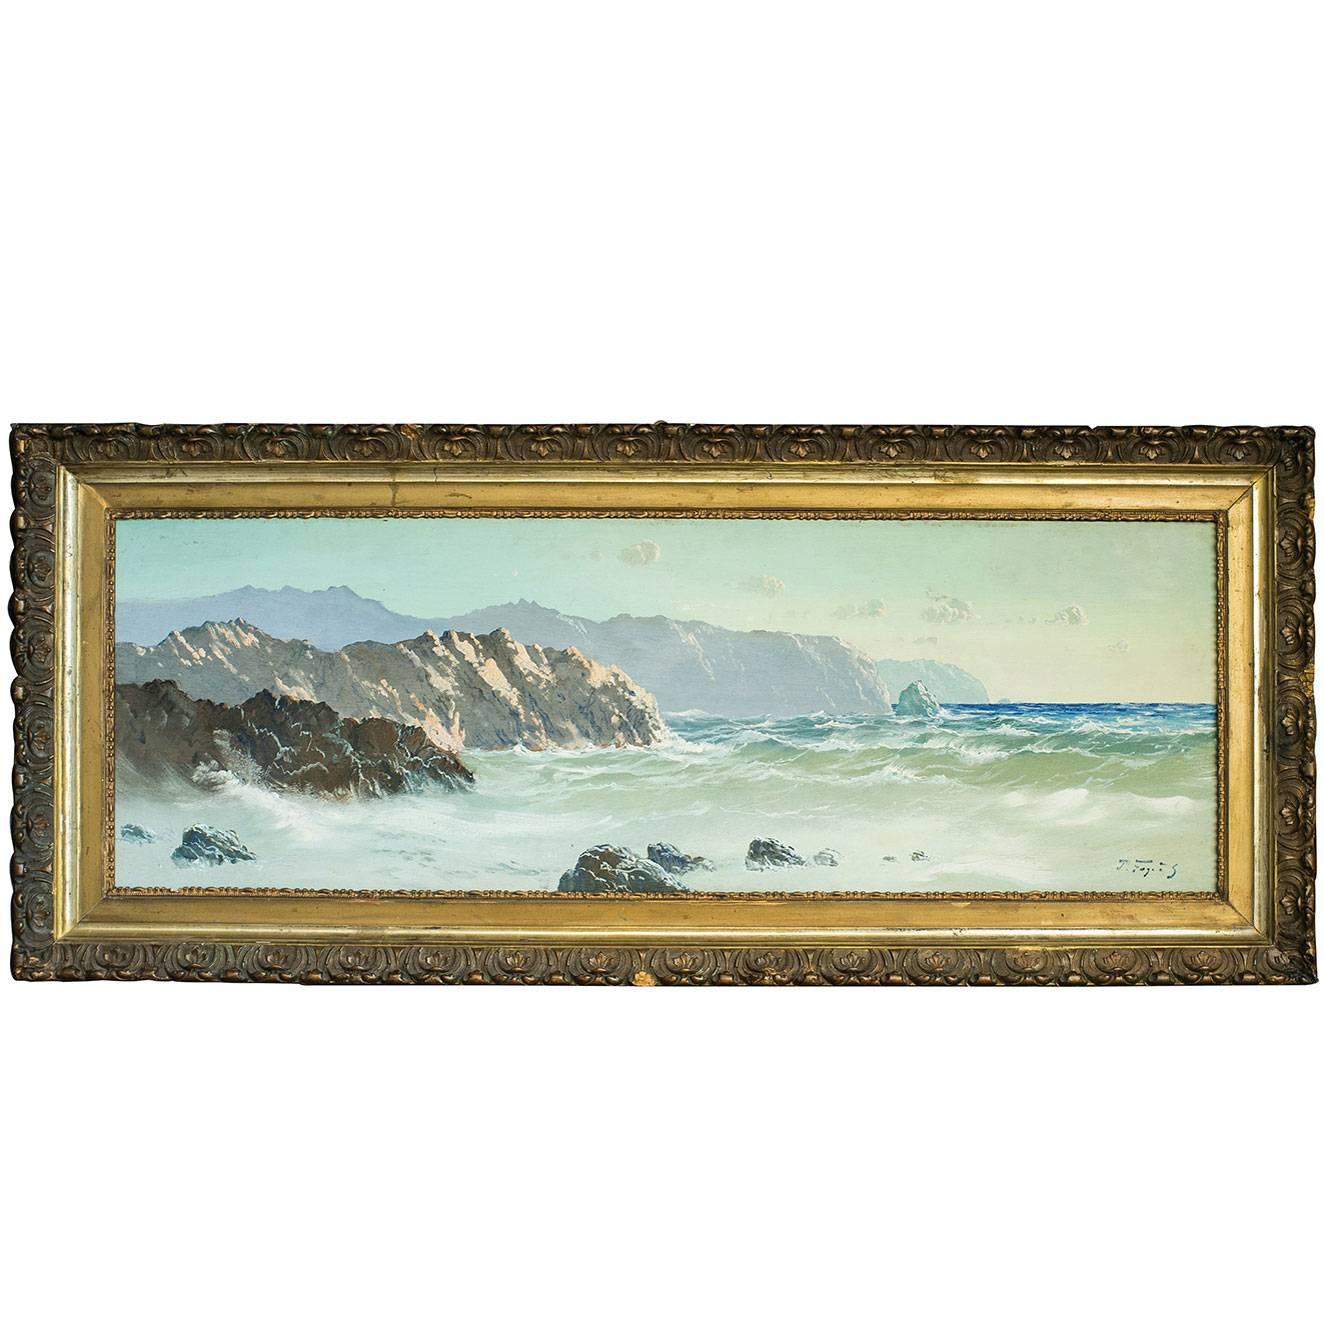 English Marine Landscape with Cliffs oil on canvas Painting